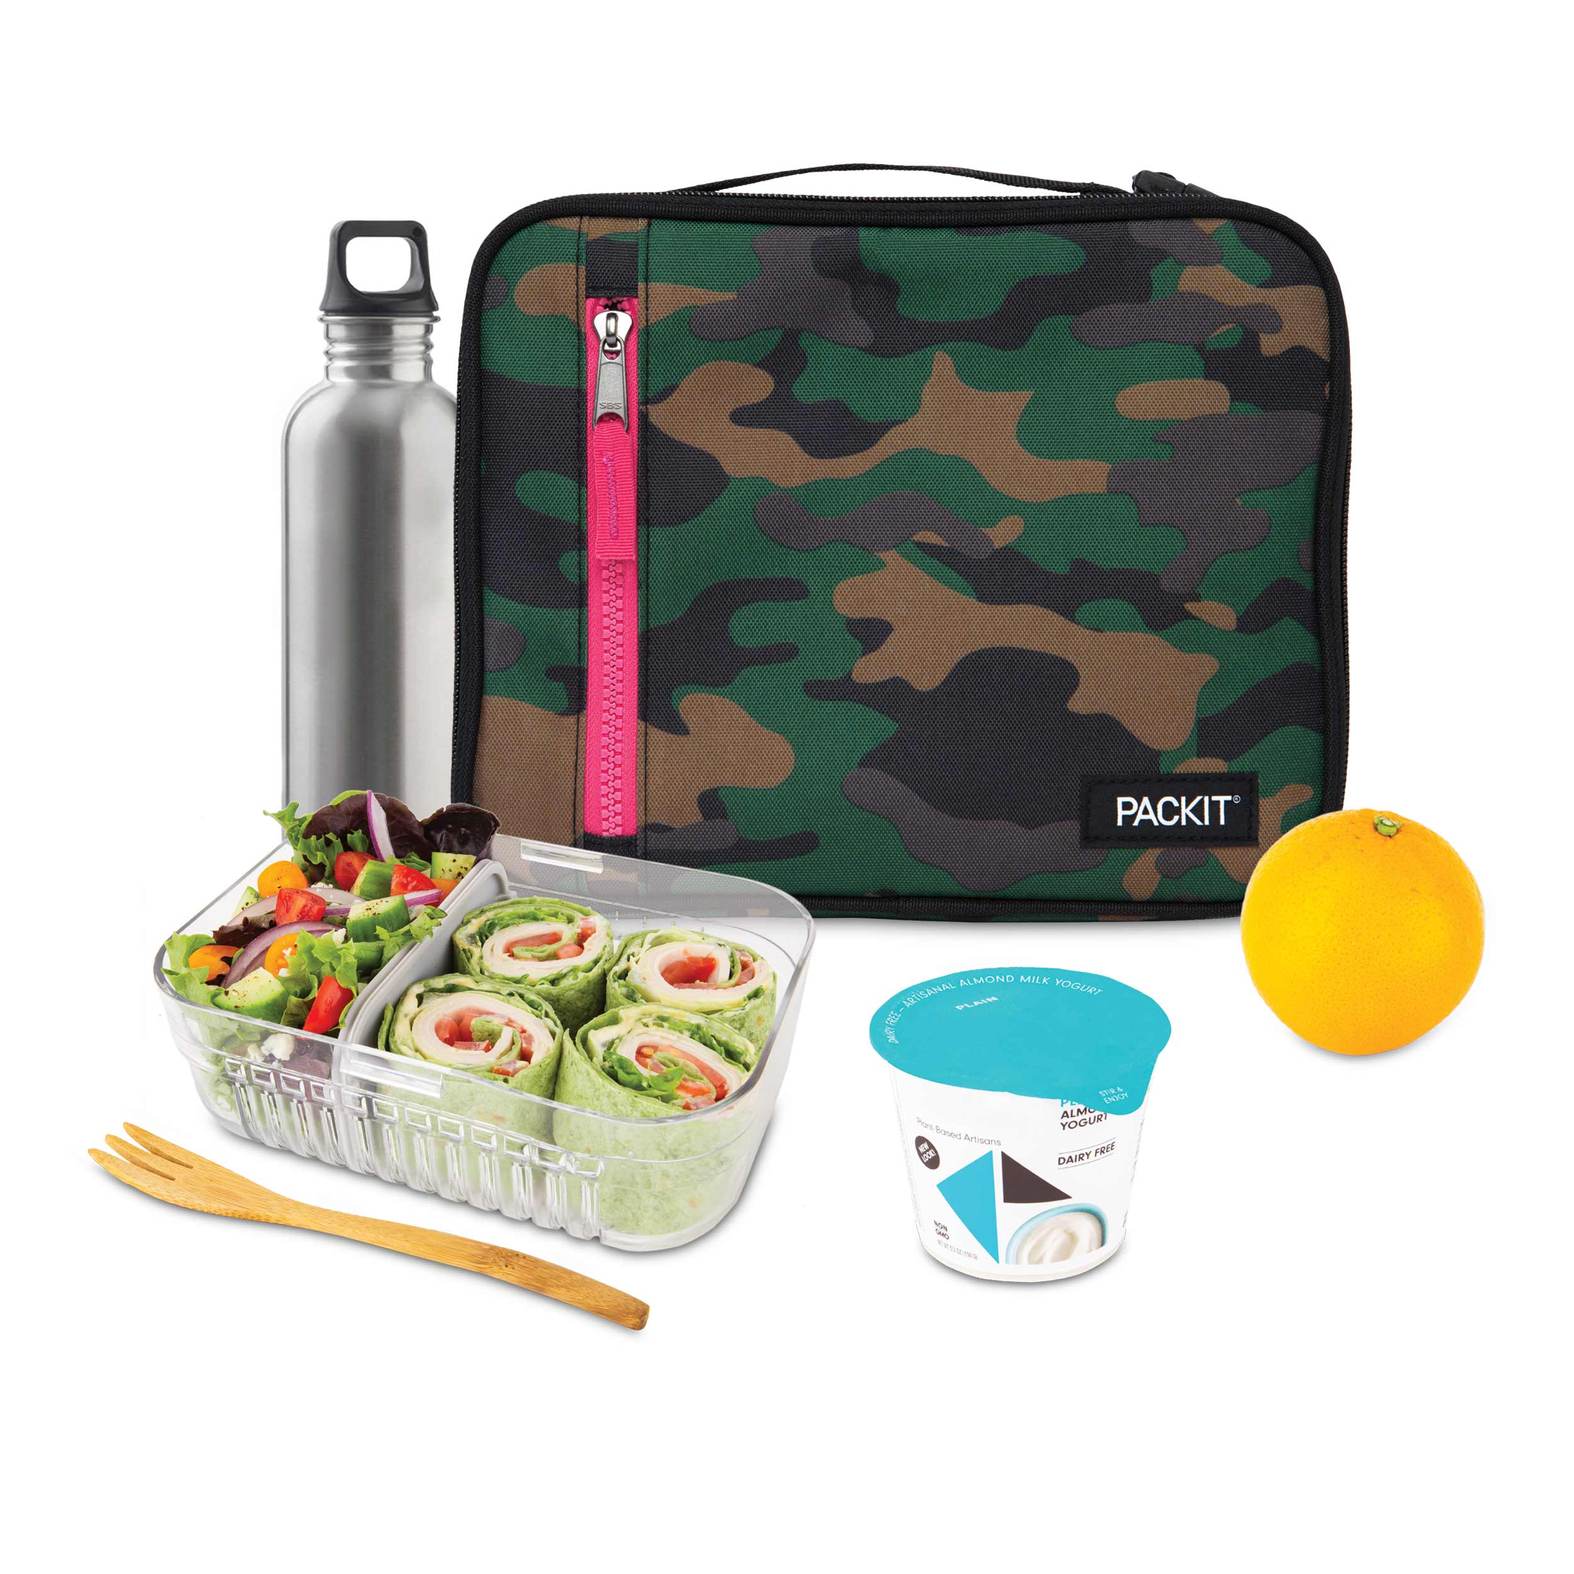 Amazon.com: Office Depot Brand Insulated Lunch Box, 9